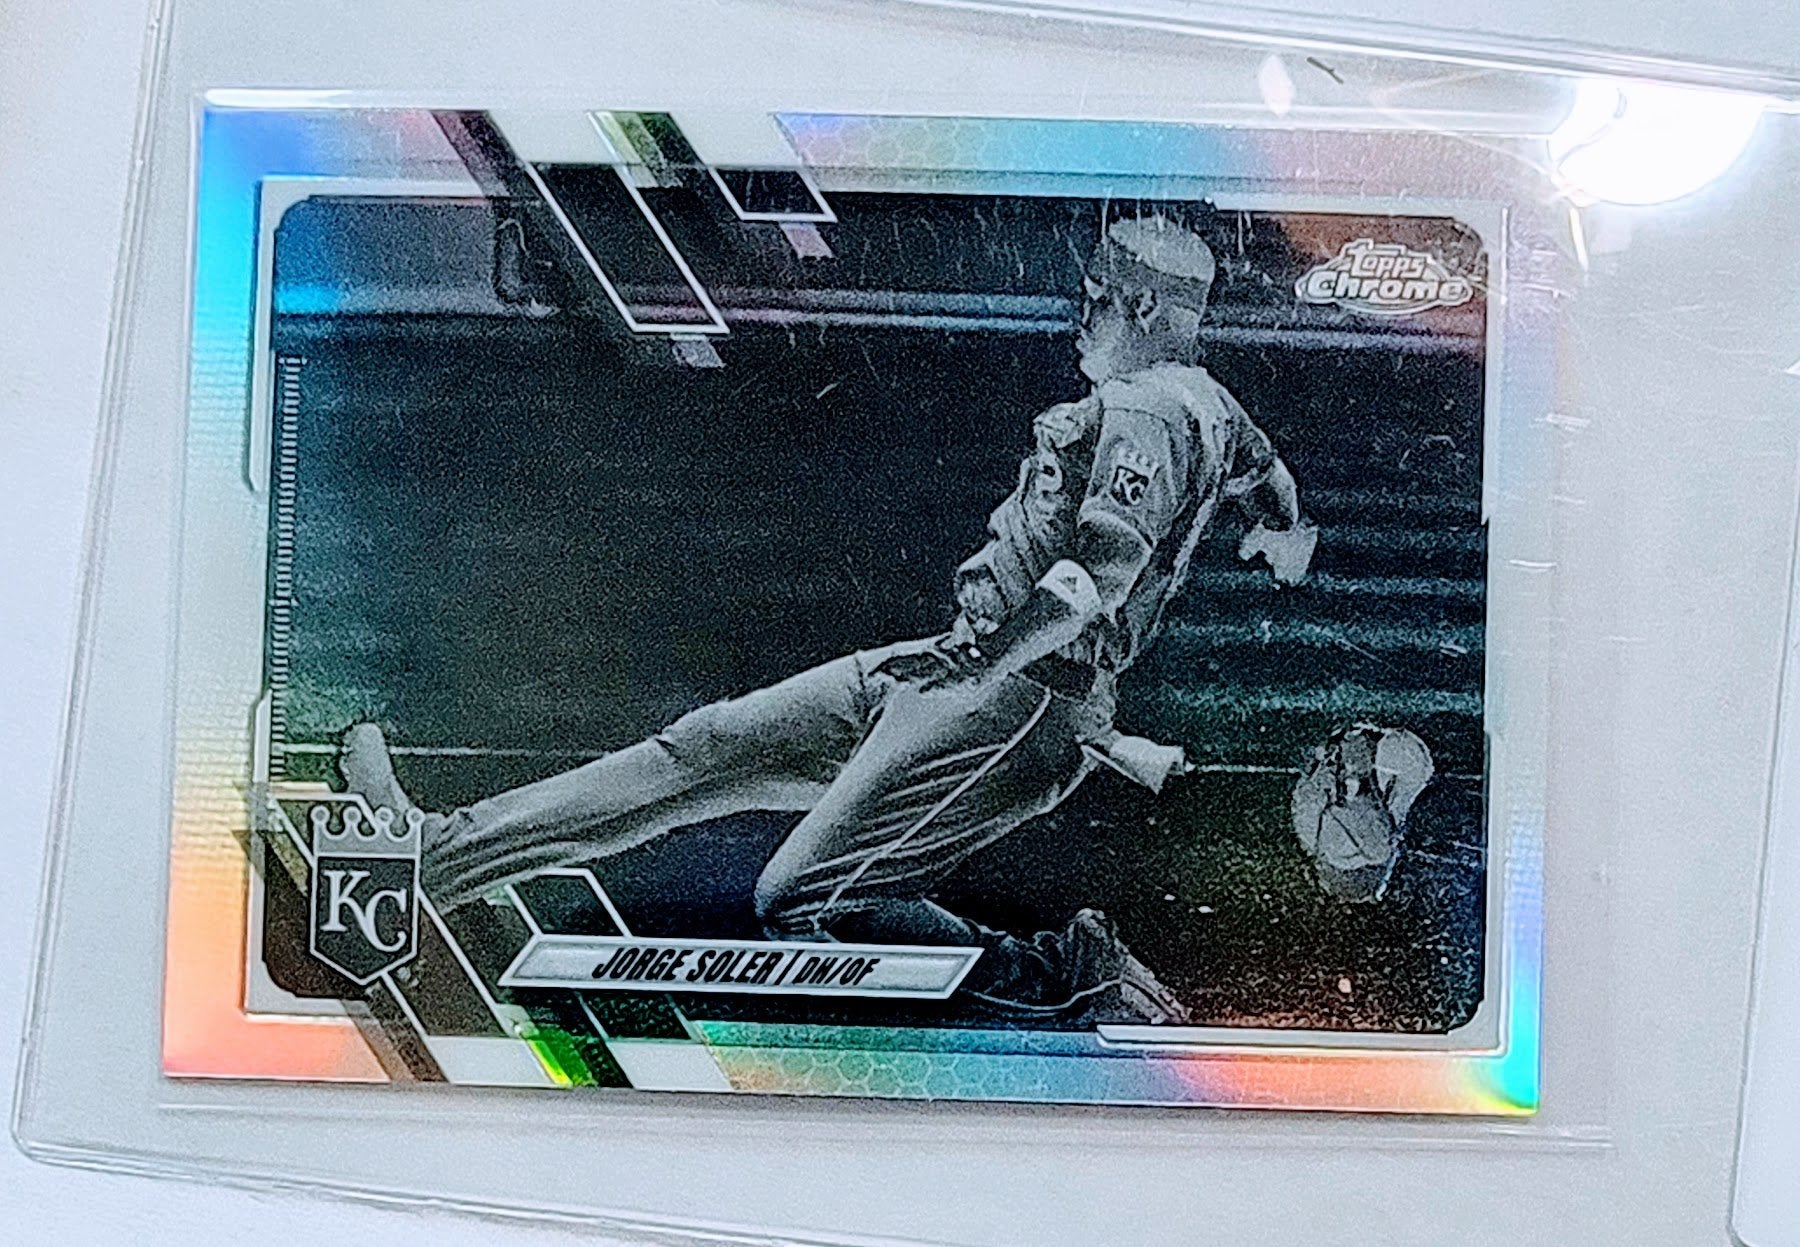 2021 Topps Chrome Jorge Soler Negative Refractor Baseball Trading Card TPTV simple Xclusive Collectibles   